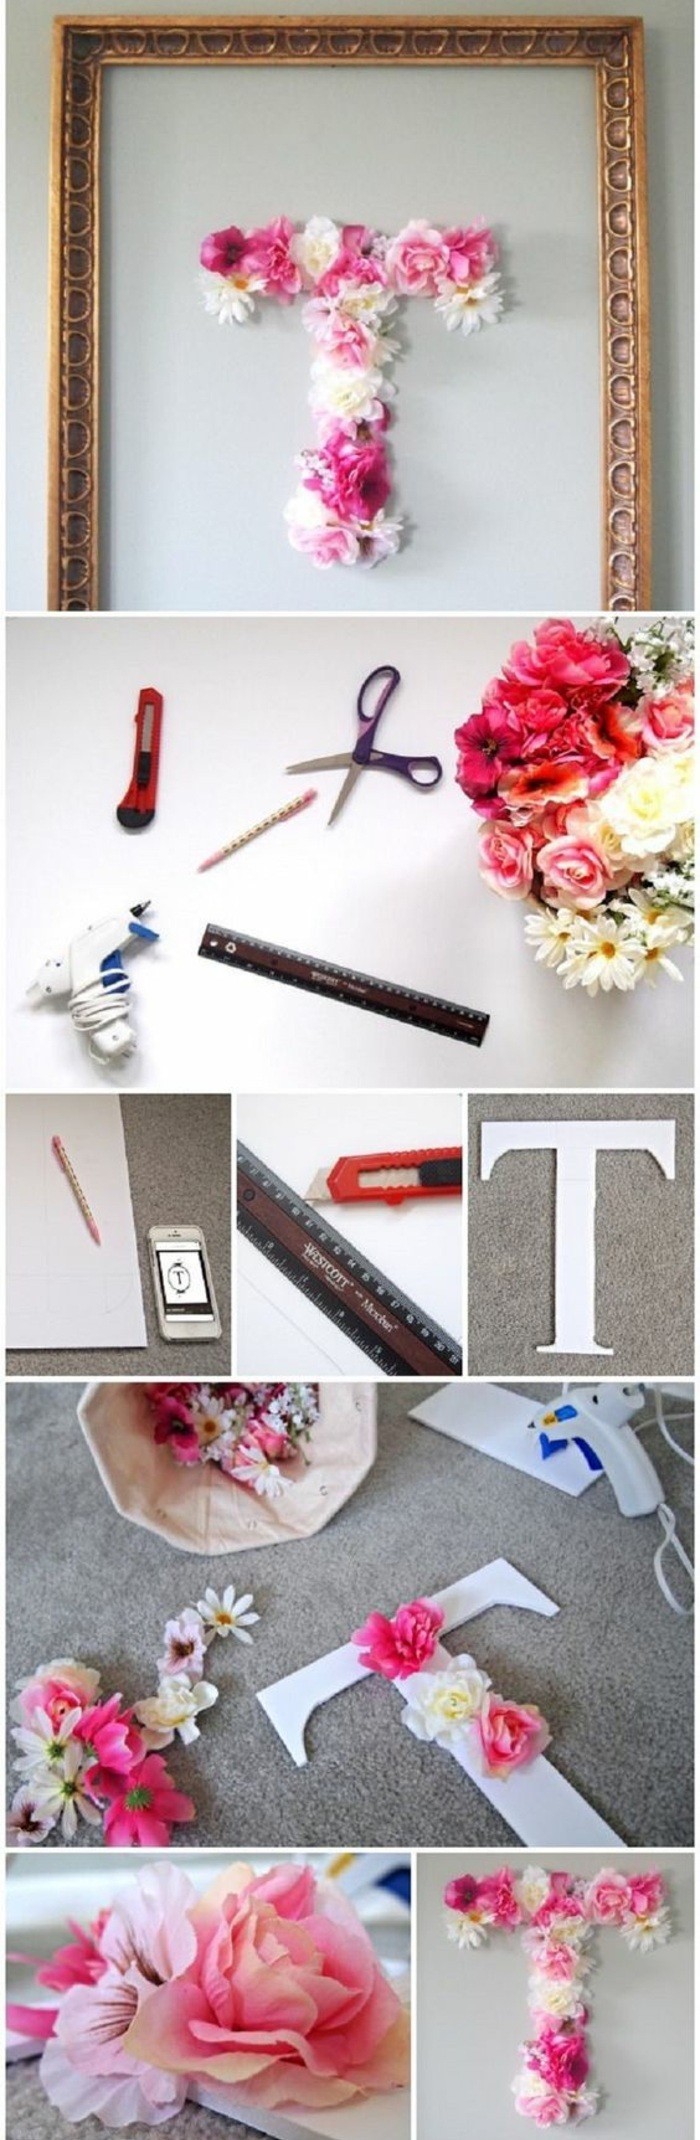 paper letter t, flowers glued to it, golden frame, cool art designs, step by step, diy tutorial